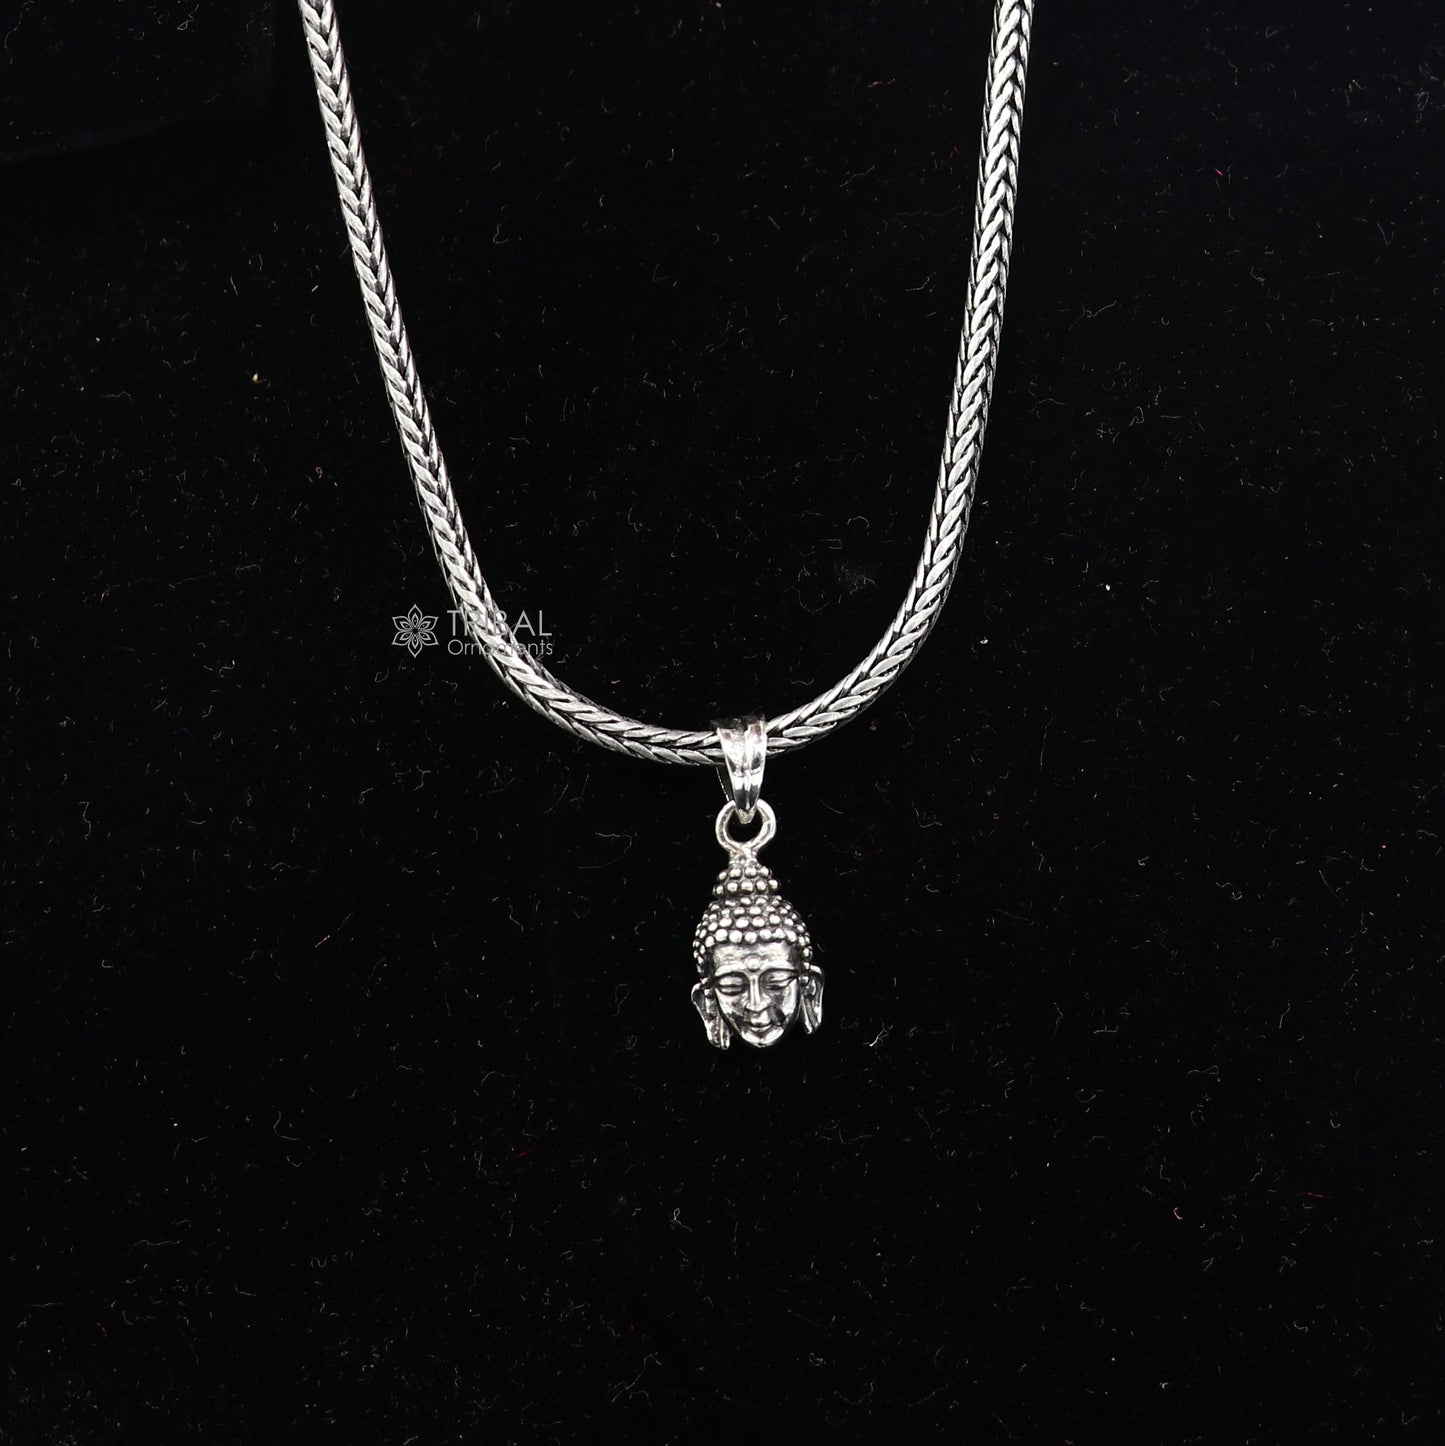 925 silver Lord Buddha face pendant pendant is worn close to the heart, symbolizing the aspiration to cultivate inner peace, wisdom nsp691 - TRIBAL ORNAMENTS